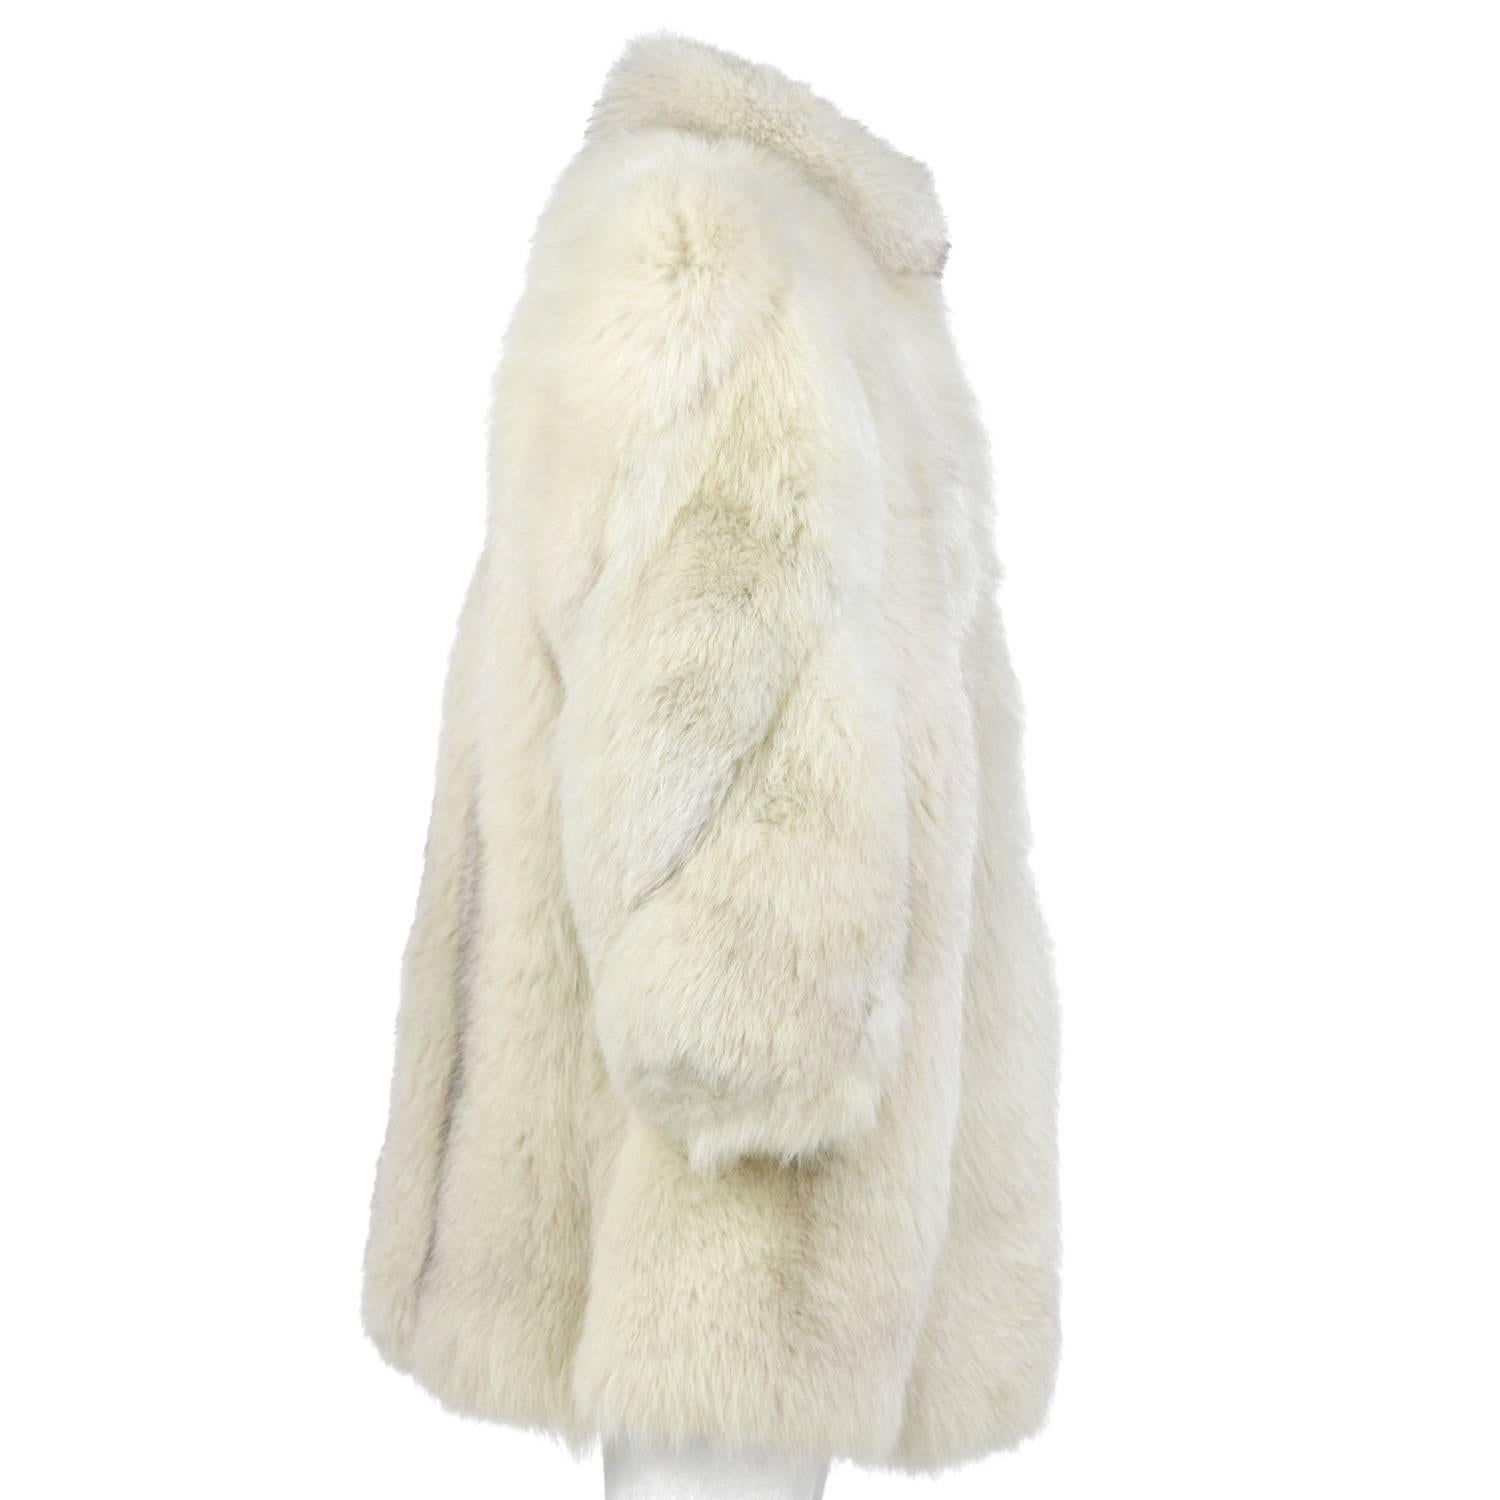 Snow white super soft fox fur coat. The item was produced in the 80s and is in excellent conditions. Button closure on the collar. Lined.
Height: 86 cm 
Bust: 52 cm 
Shoulders: 44 cm 
Sleeve: 57 cm